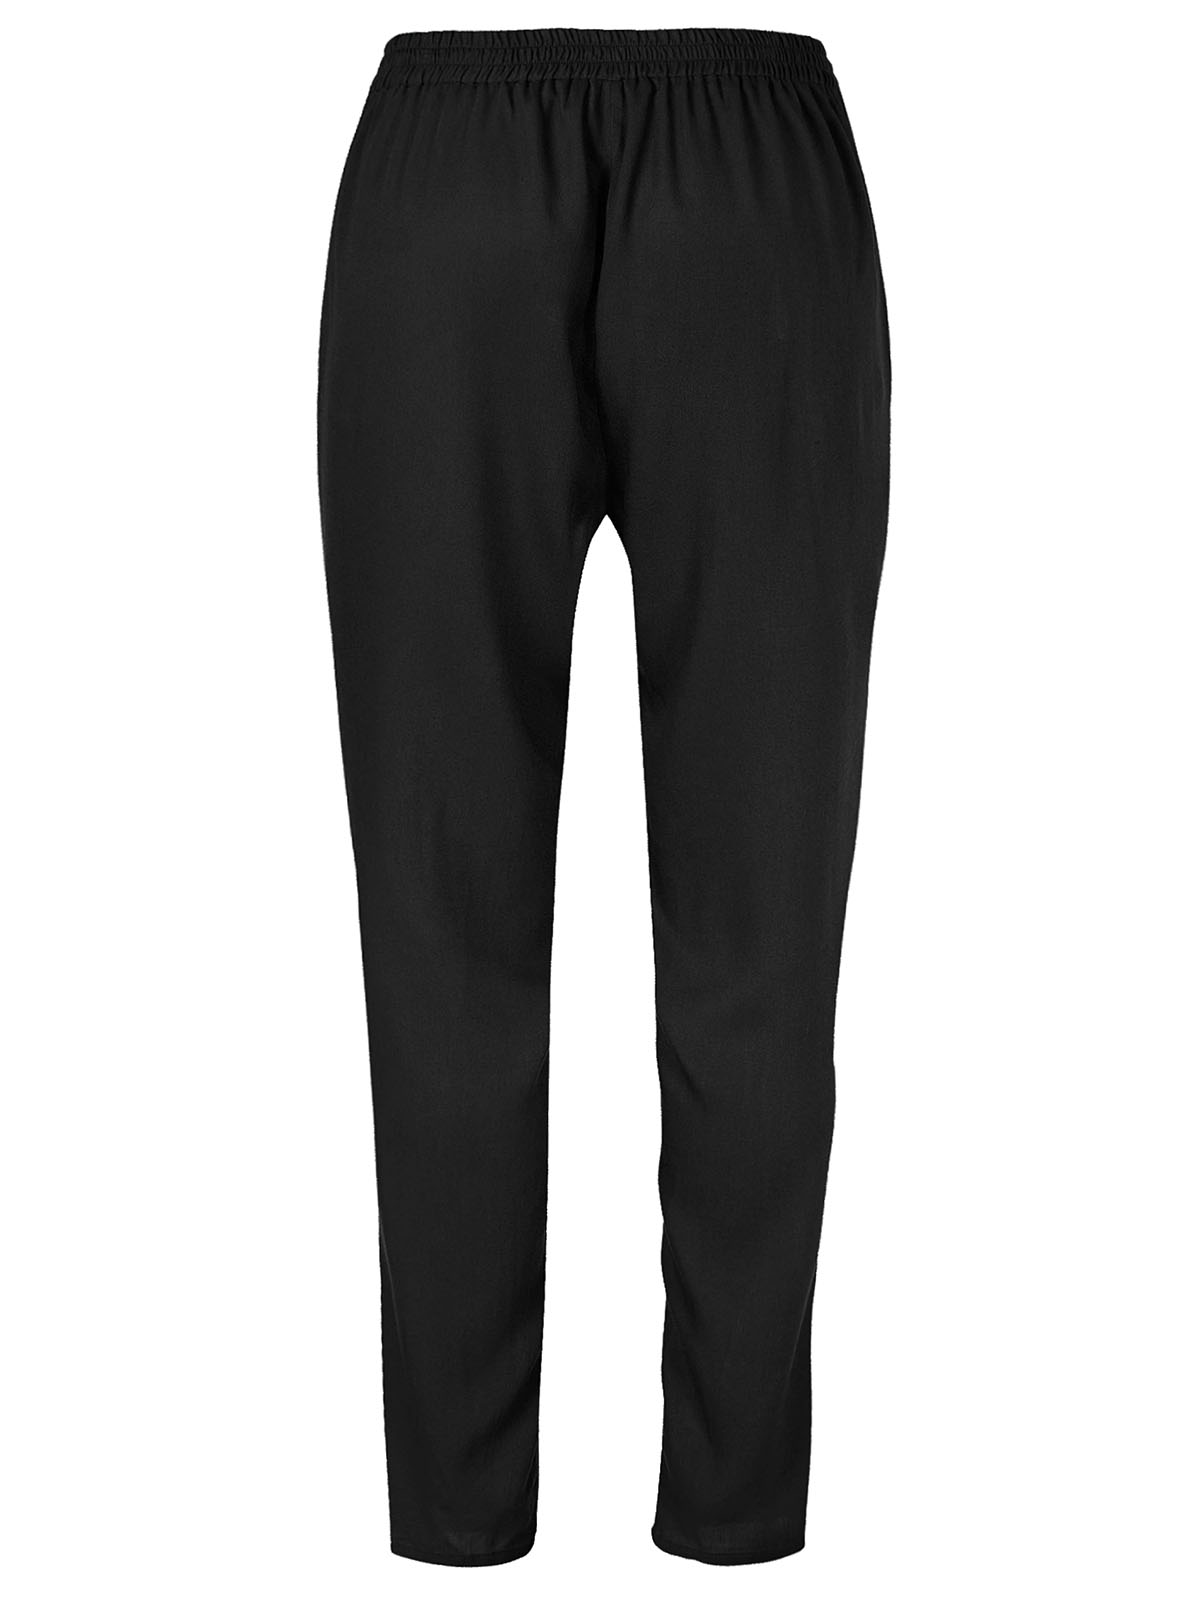 Ellos - - BLACK Mika Tapered Trousers - Size 8 to 16 (EU 34 to 42)